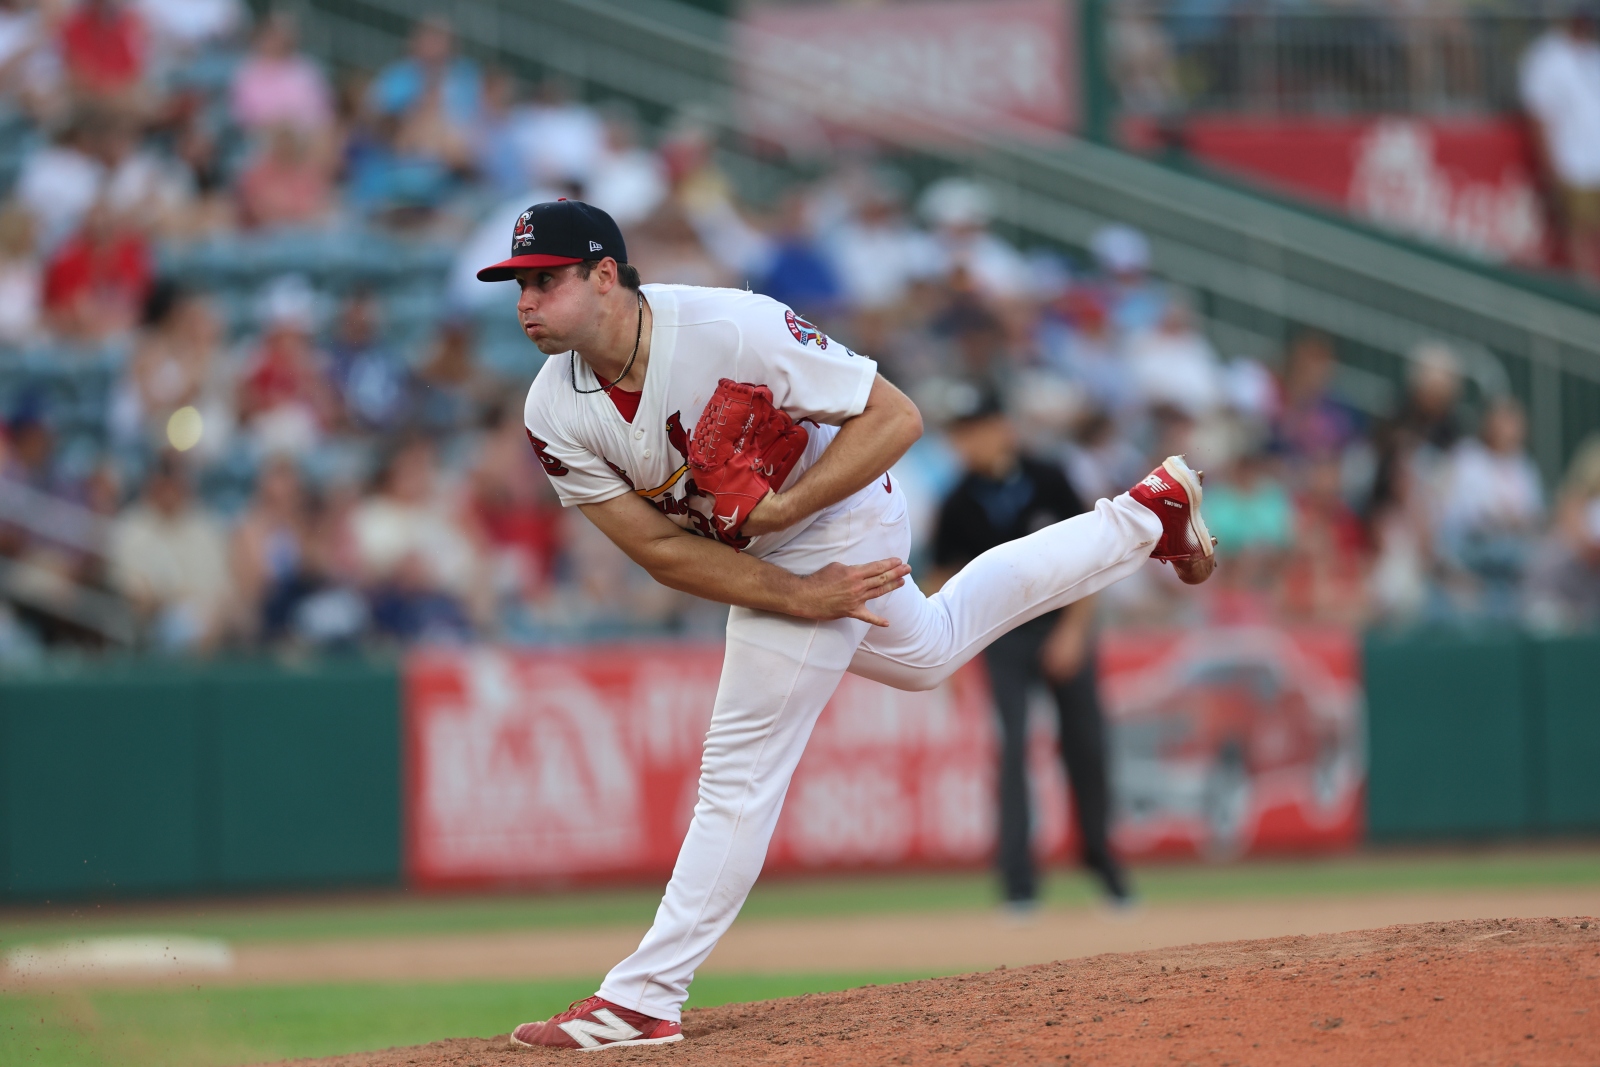 Max Rajcic, wearing a Springfield Cardinals uniform, pitches the baseball during a game at Hammons Field.